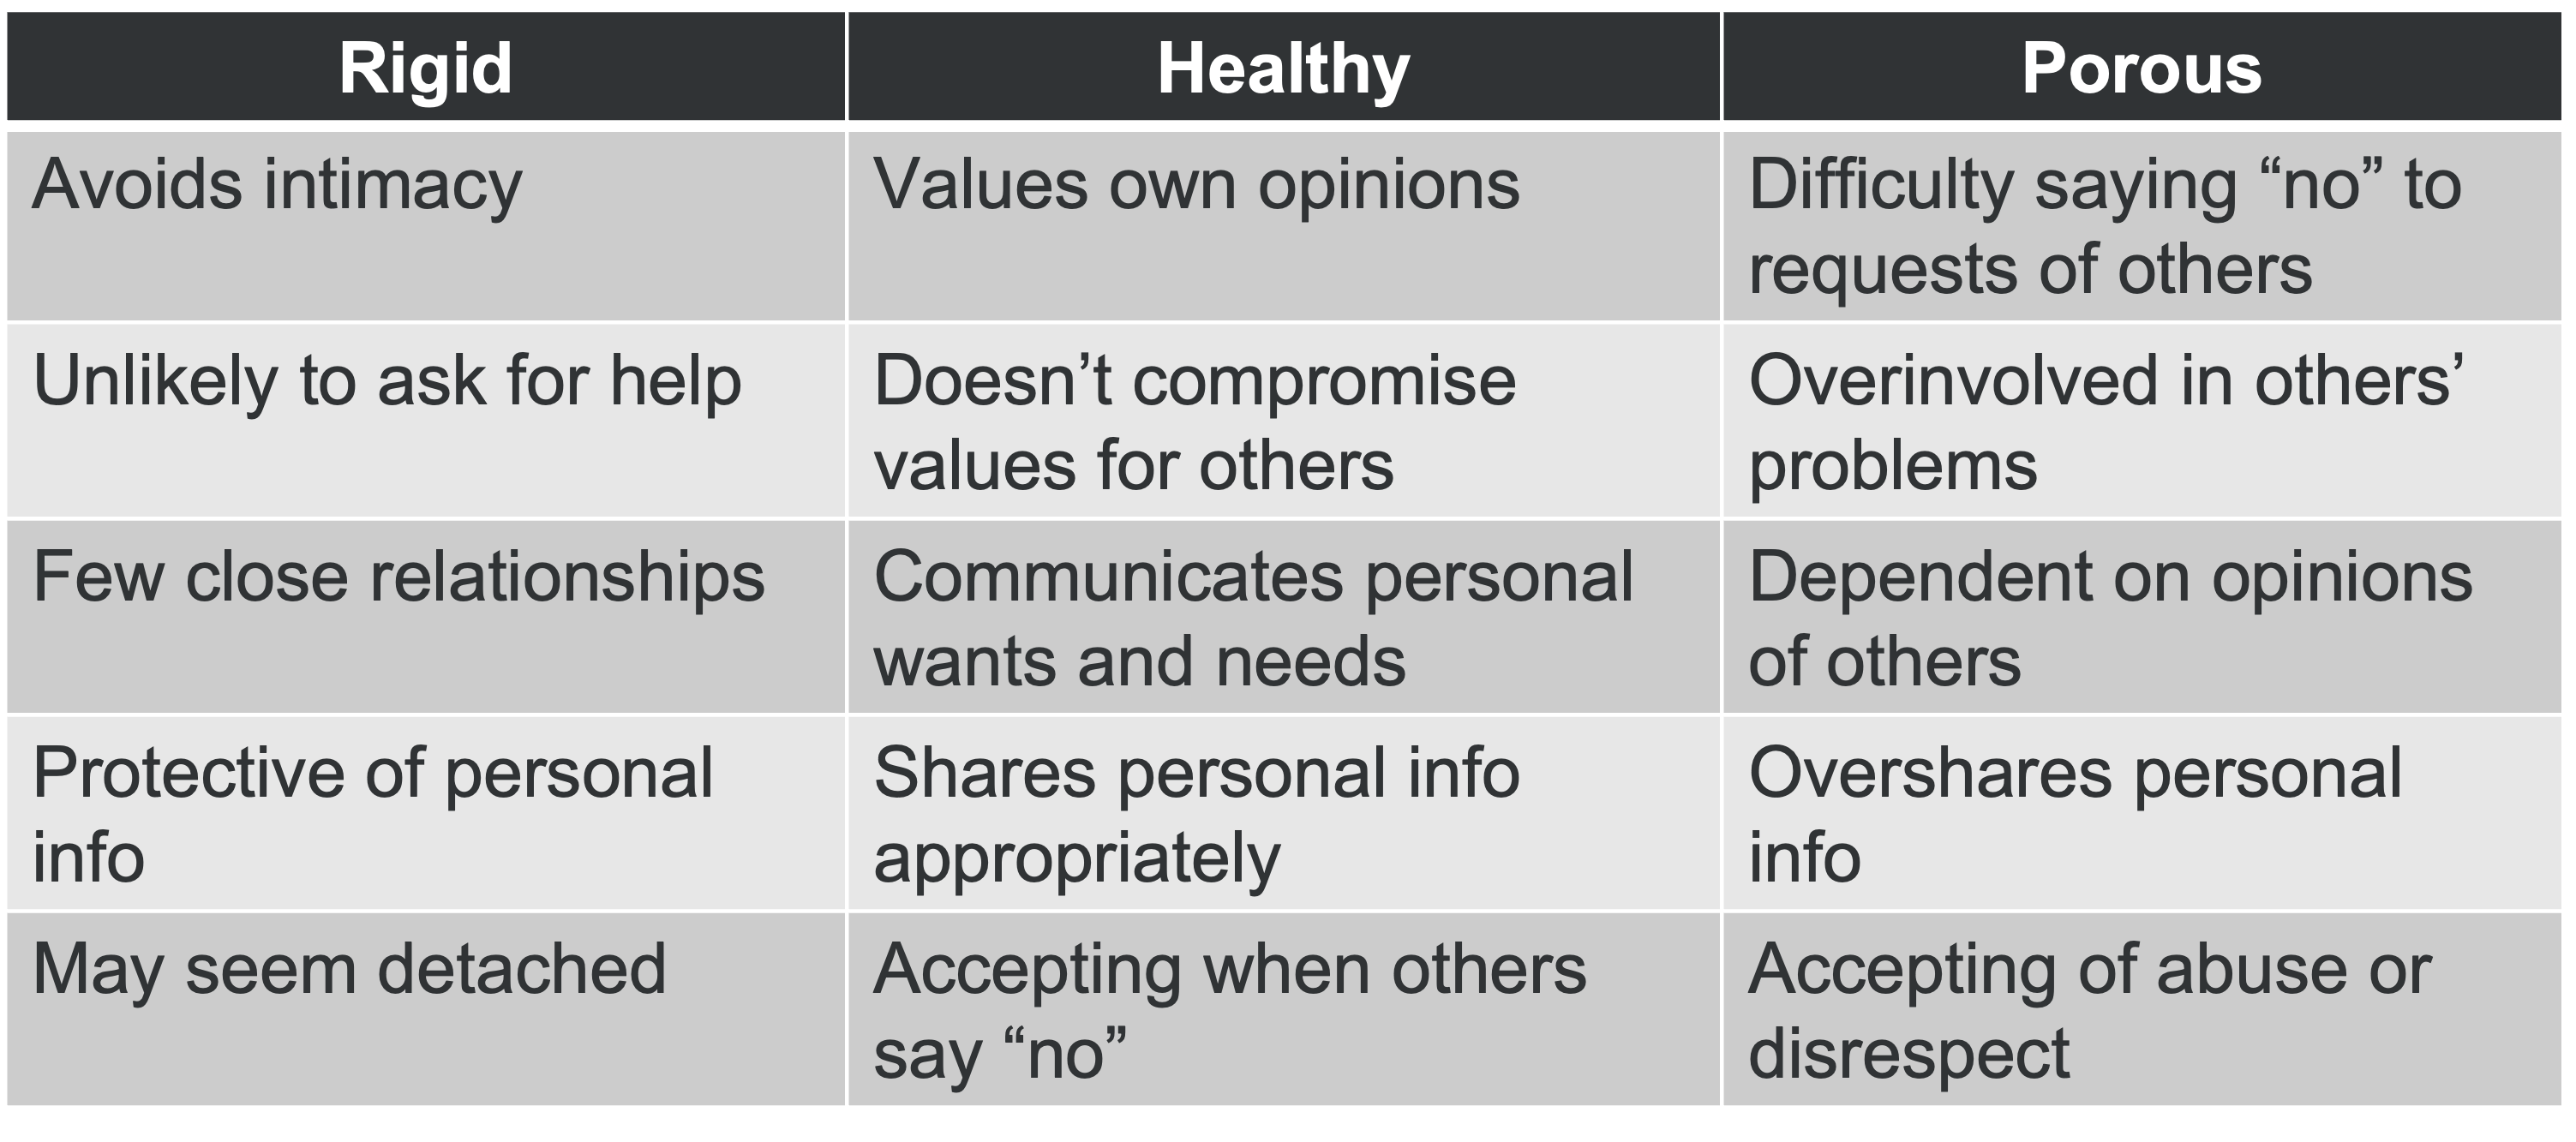 Table showing common traits of those with rigid, healthy, and porous boundaries.